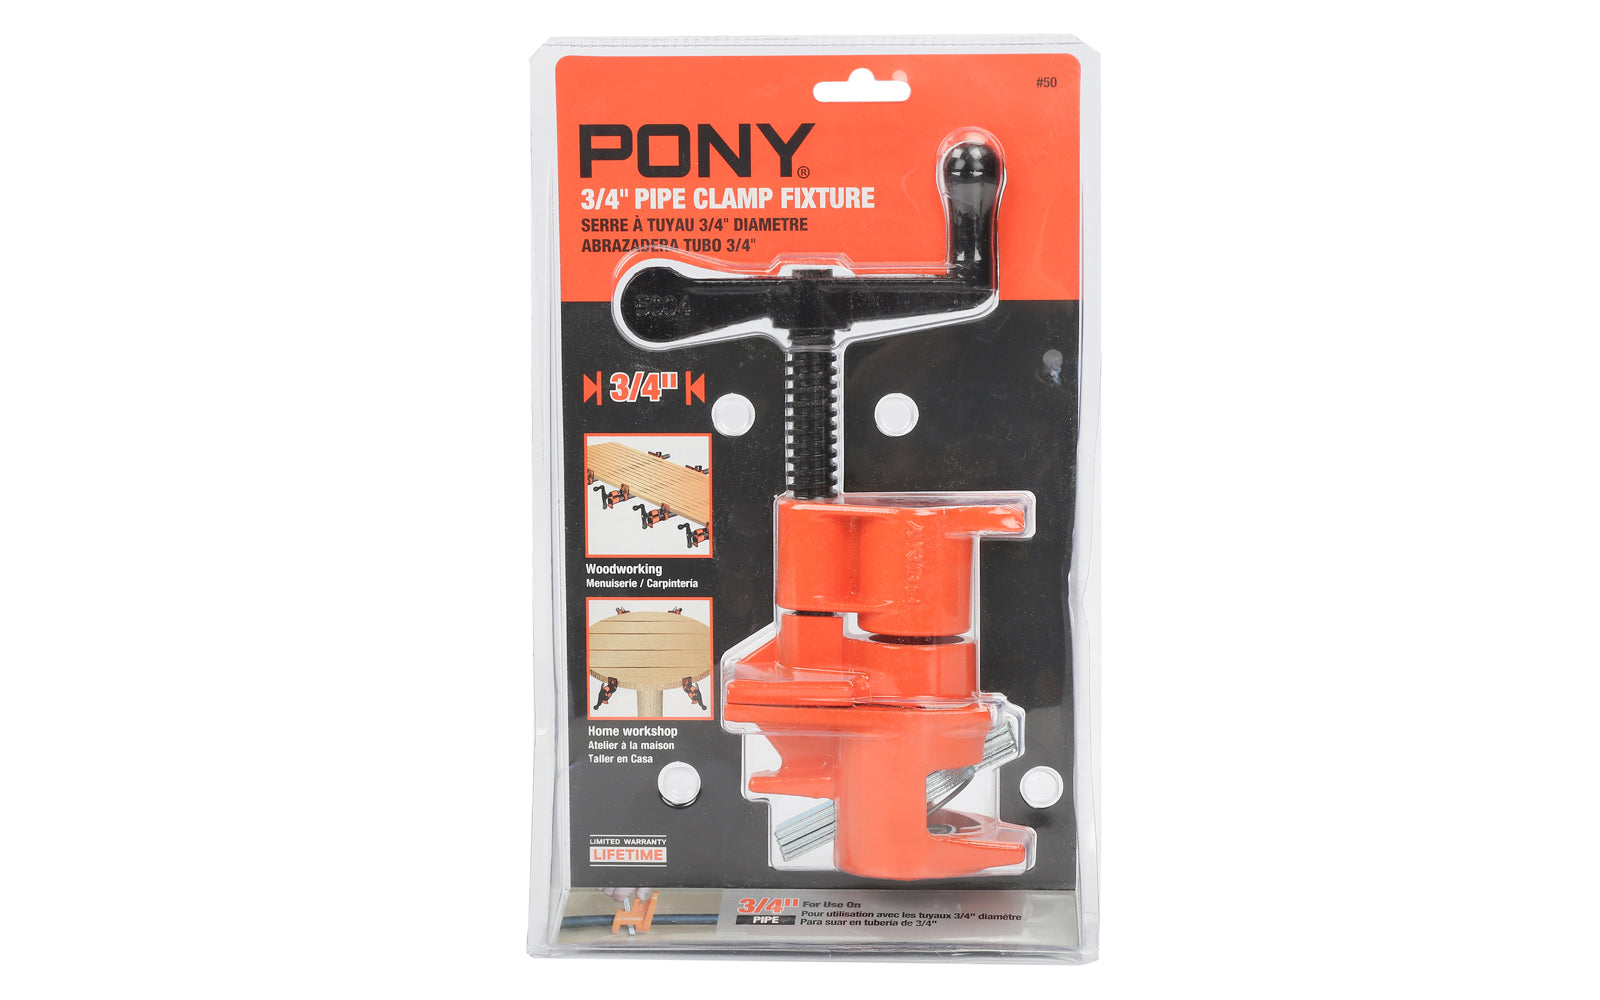 Pony 3/4" Pipe Clamp Fixture ~ No. 50 - Pony Pipe Clamp - Jorgensen Pipe Clamp - 3/4" Pipe clamp - Cast Iron frame & steel hardware - Crank Handle - #50